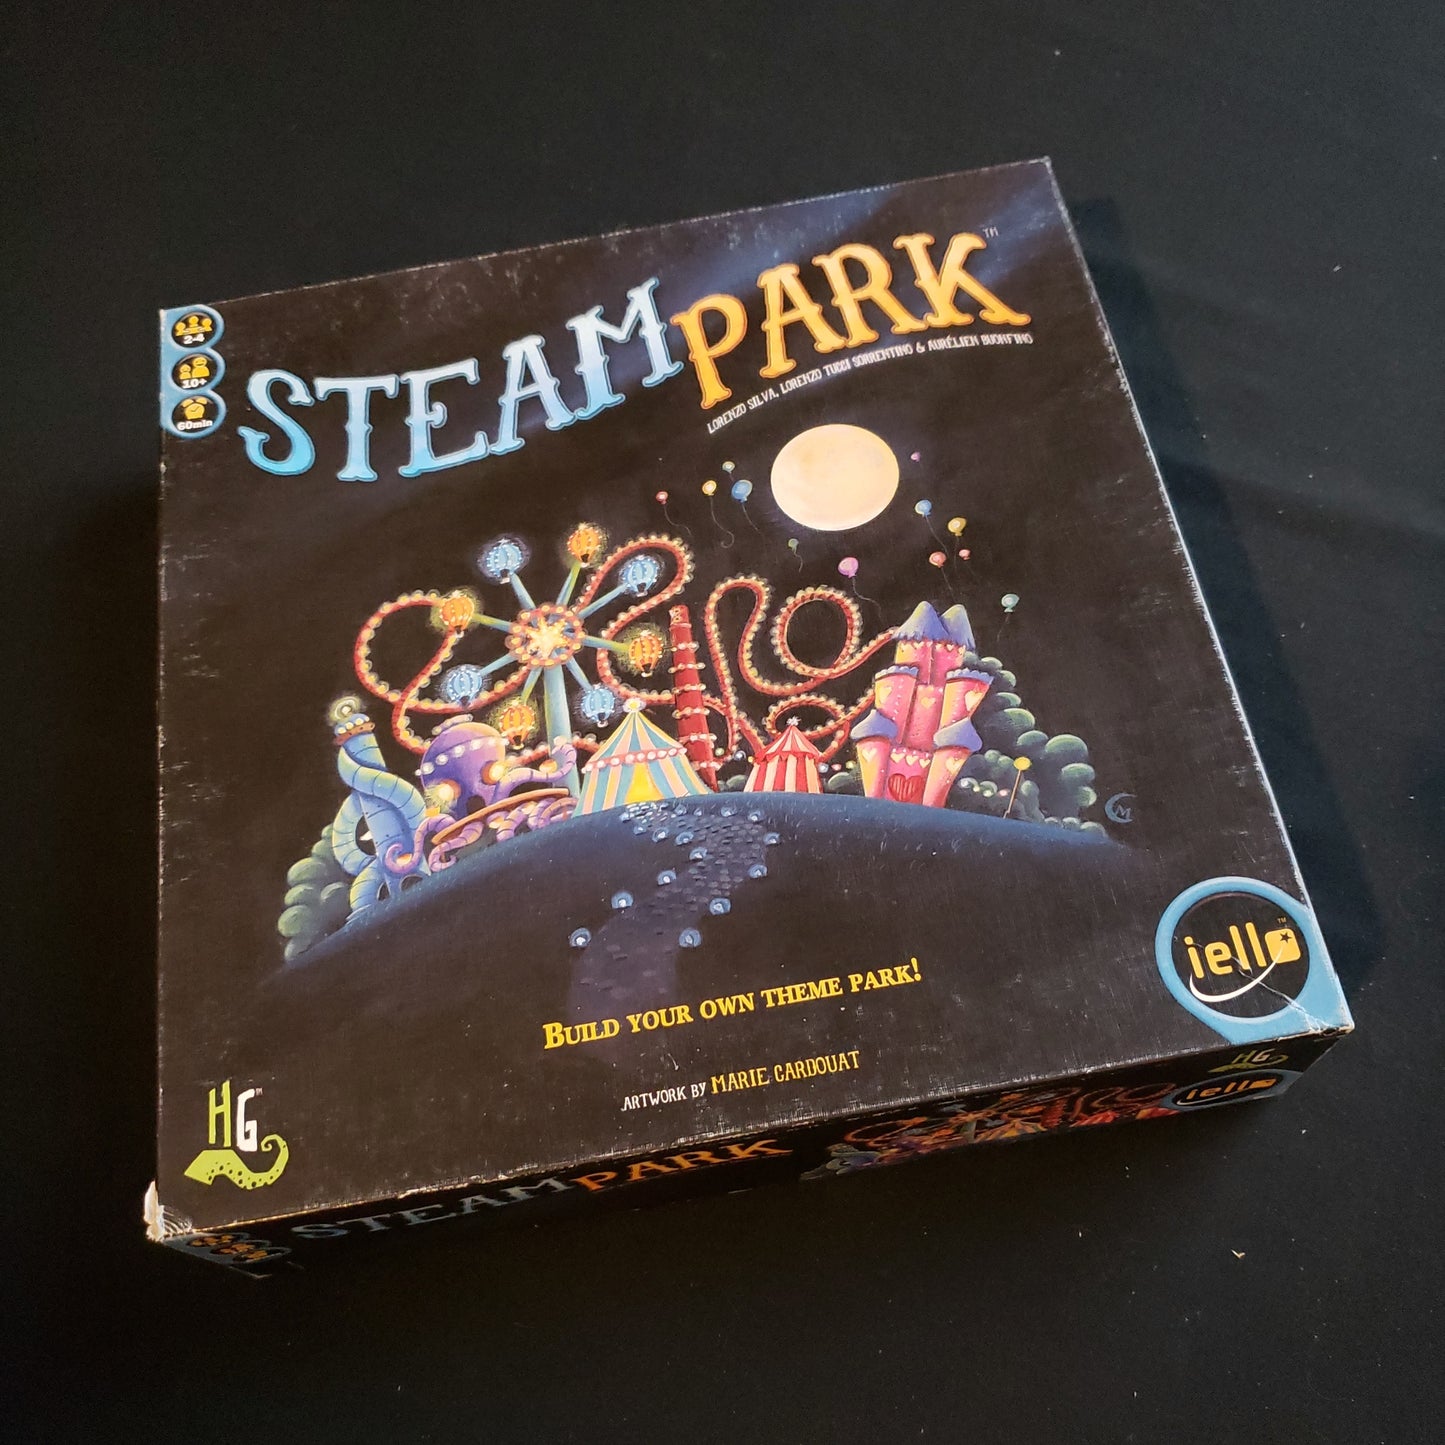 Image shows the front cover of the box of the Steam Park board game